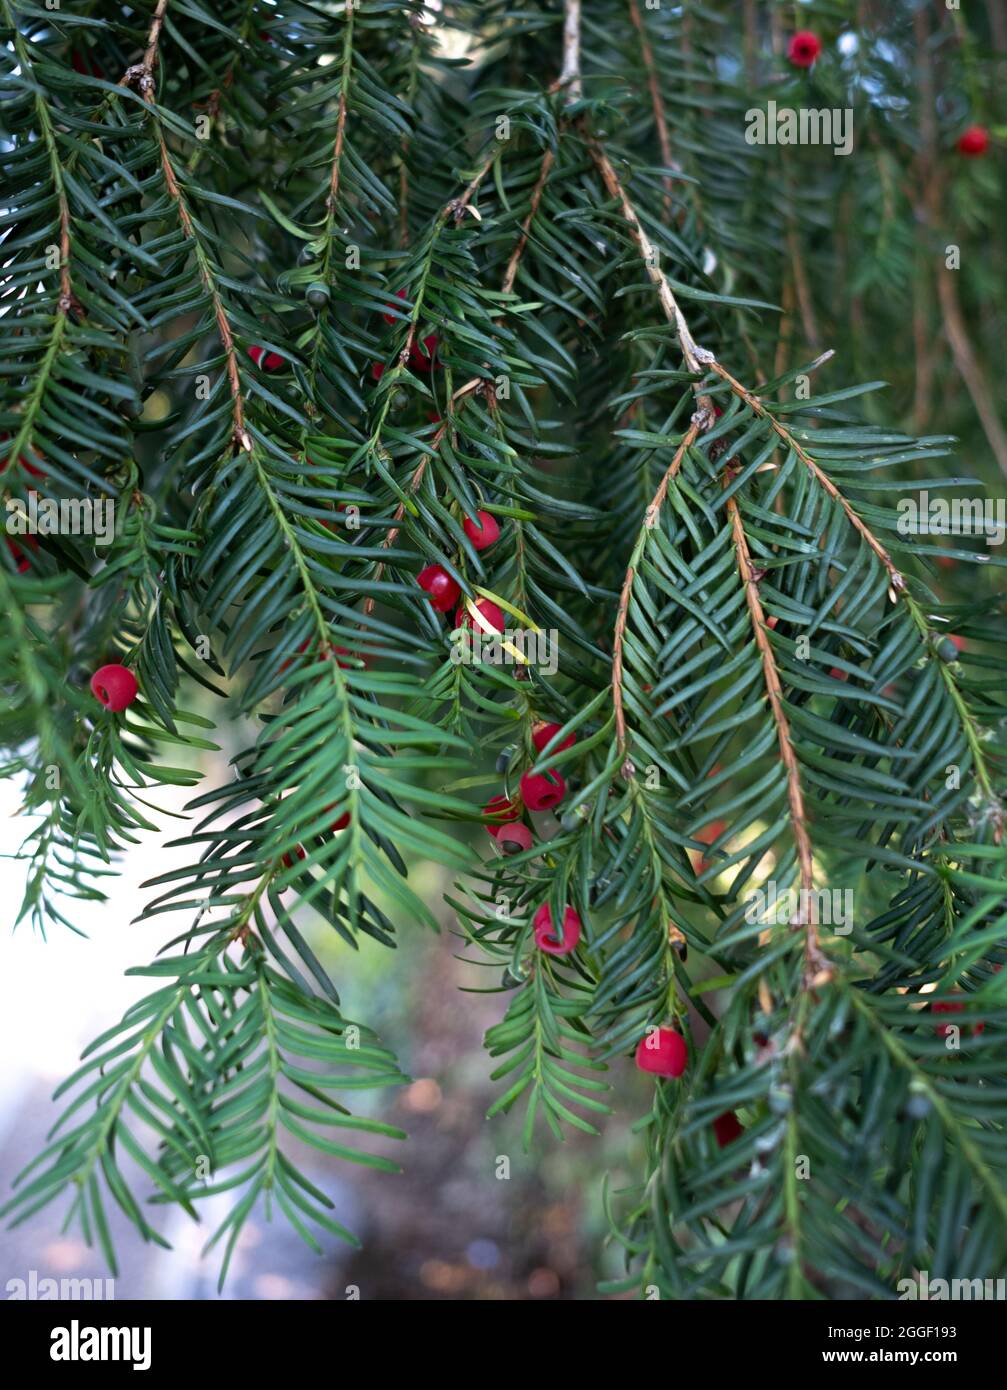 Taxus baccata or common yew branches with fruits Stock Photo